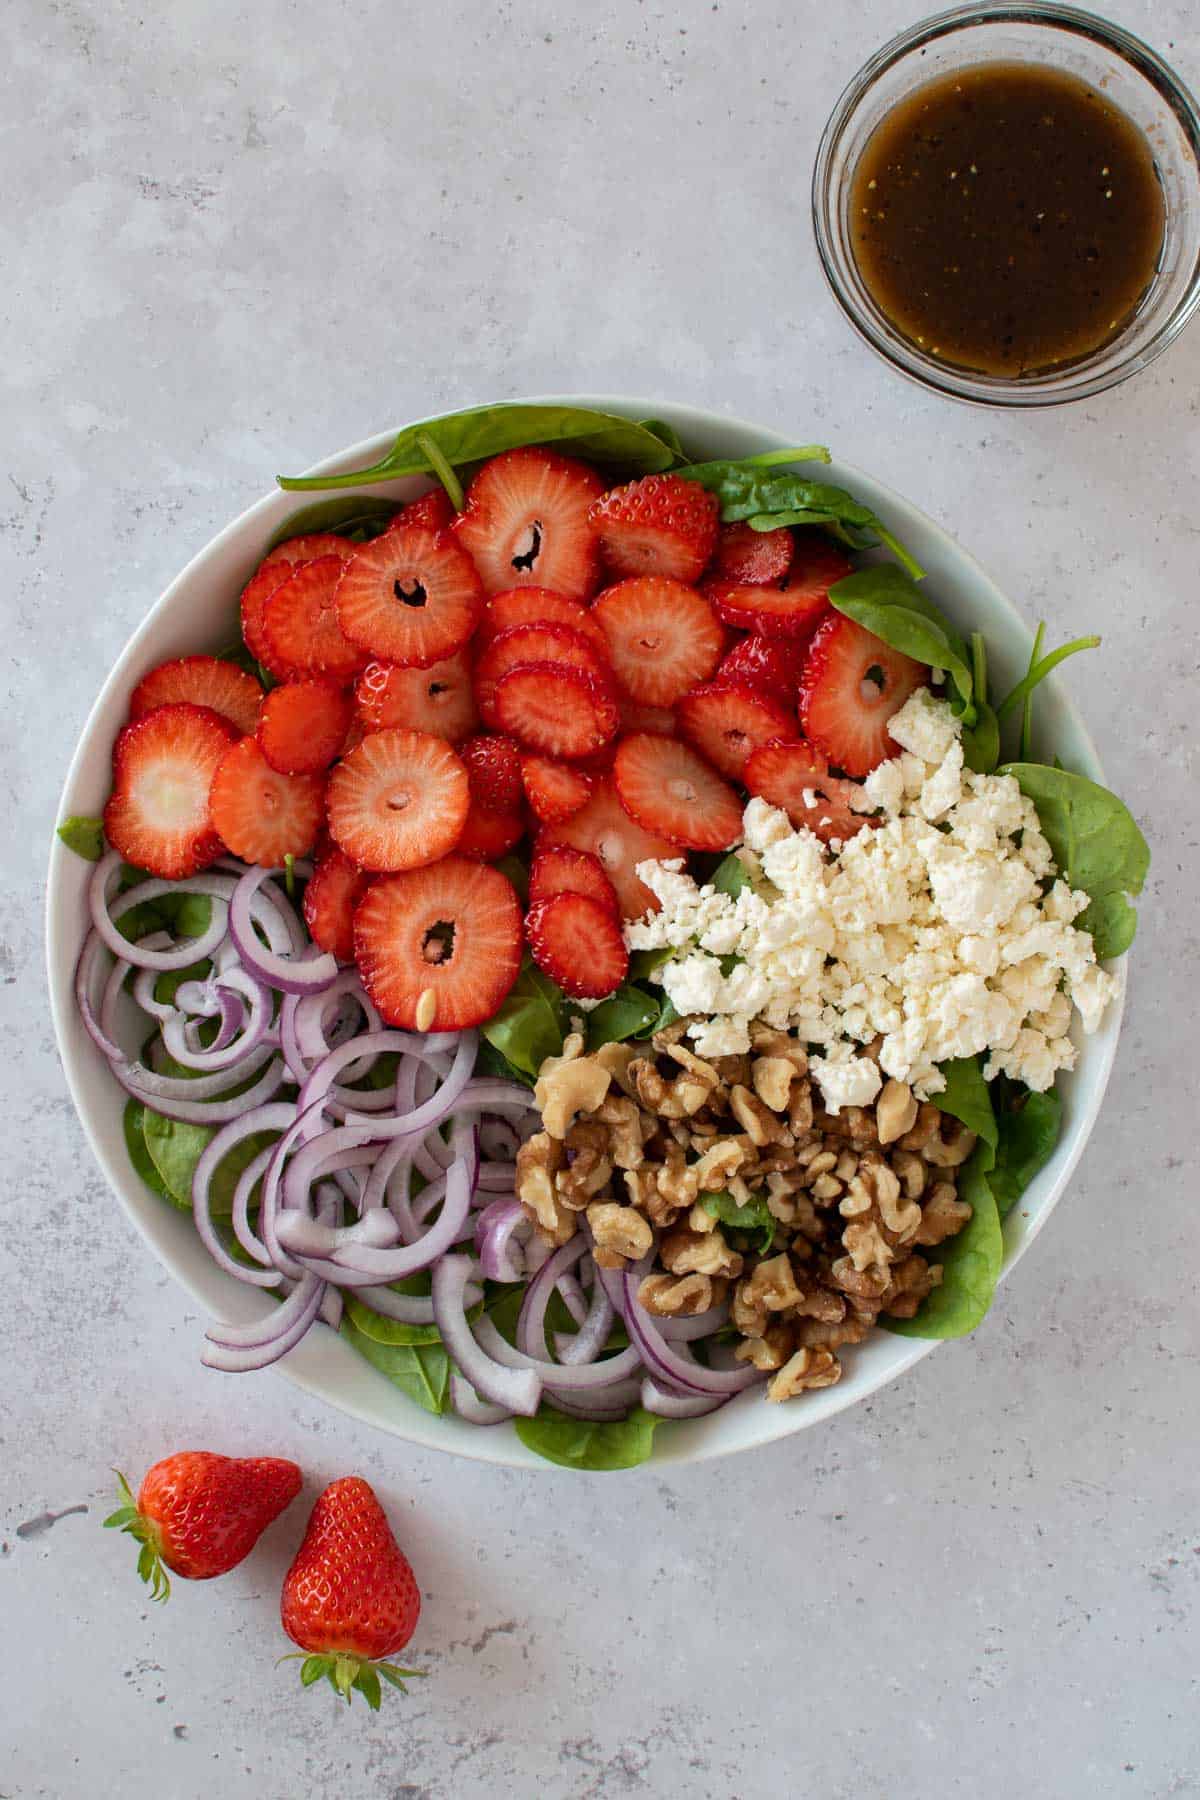 Spinach, strawberries, feta cheese, walnuts and red onions in a bowl.